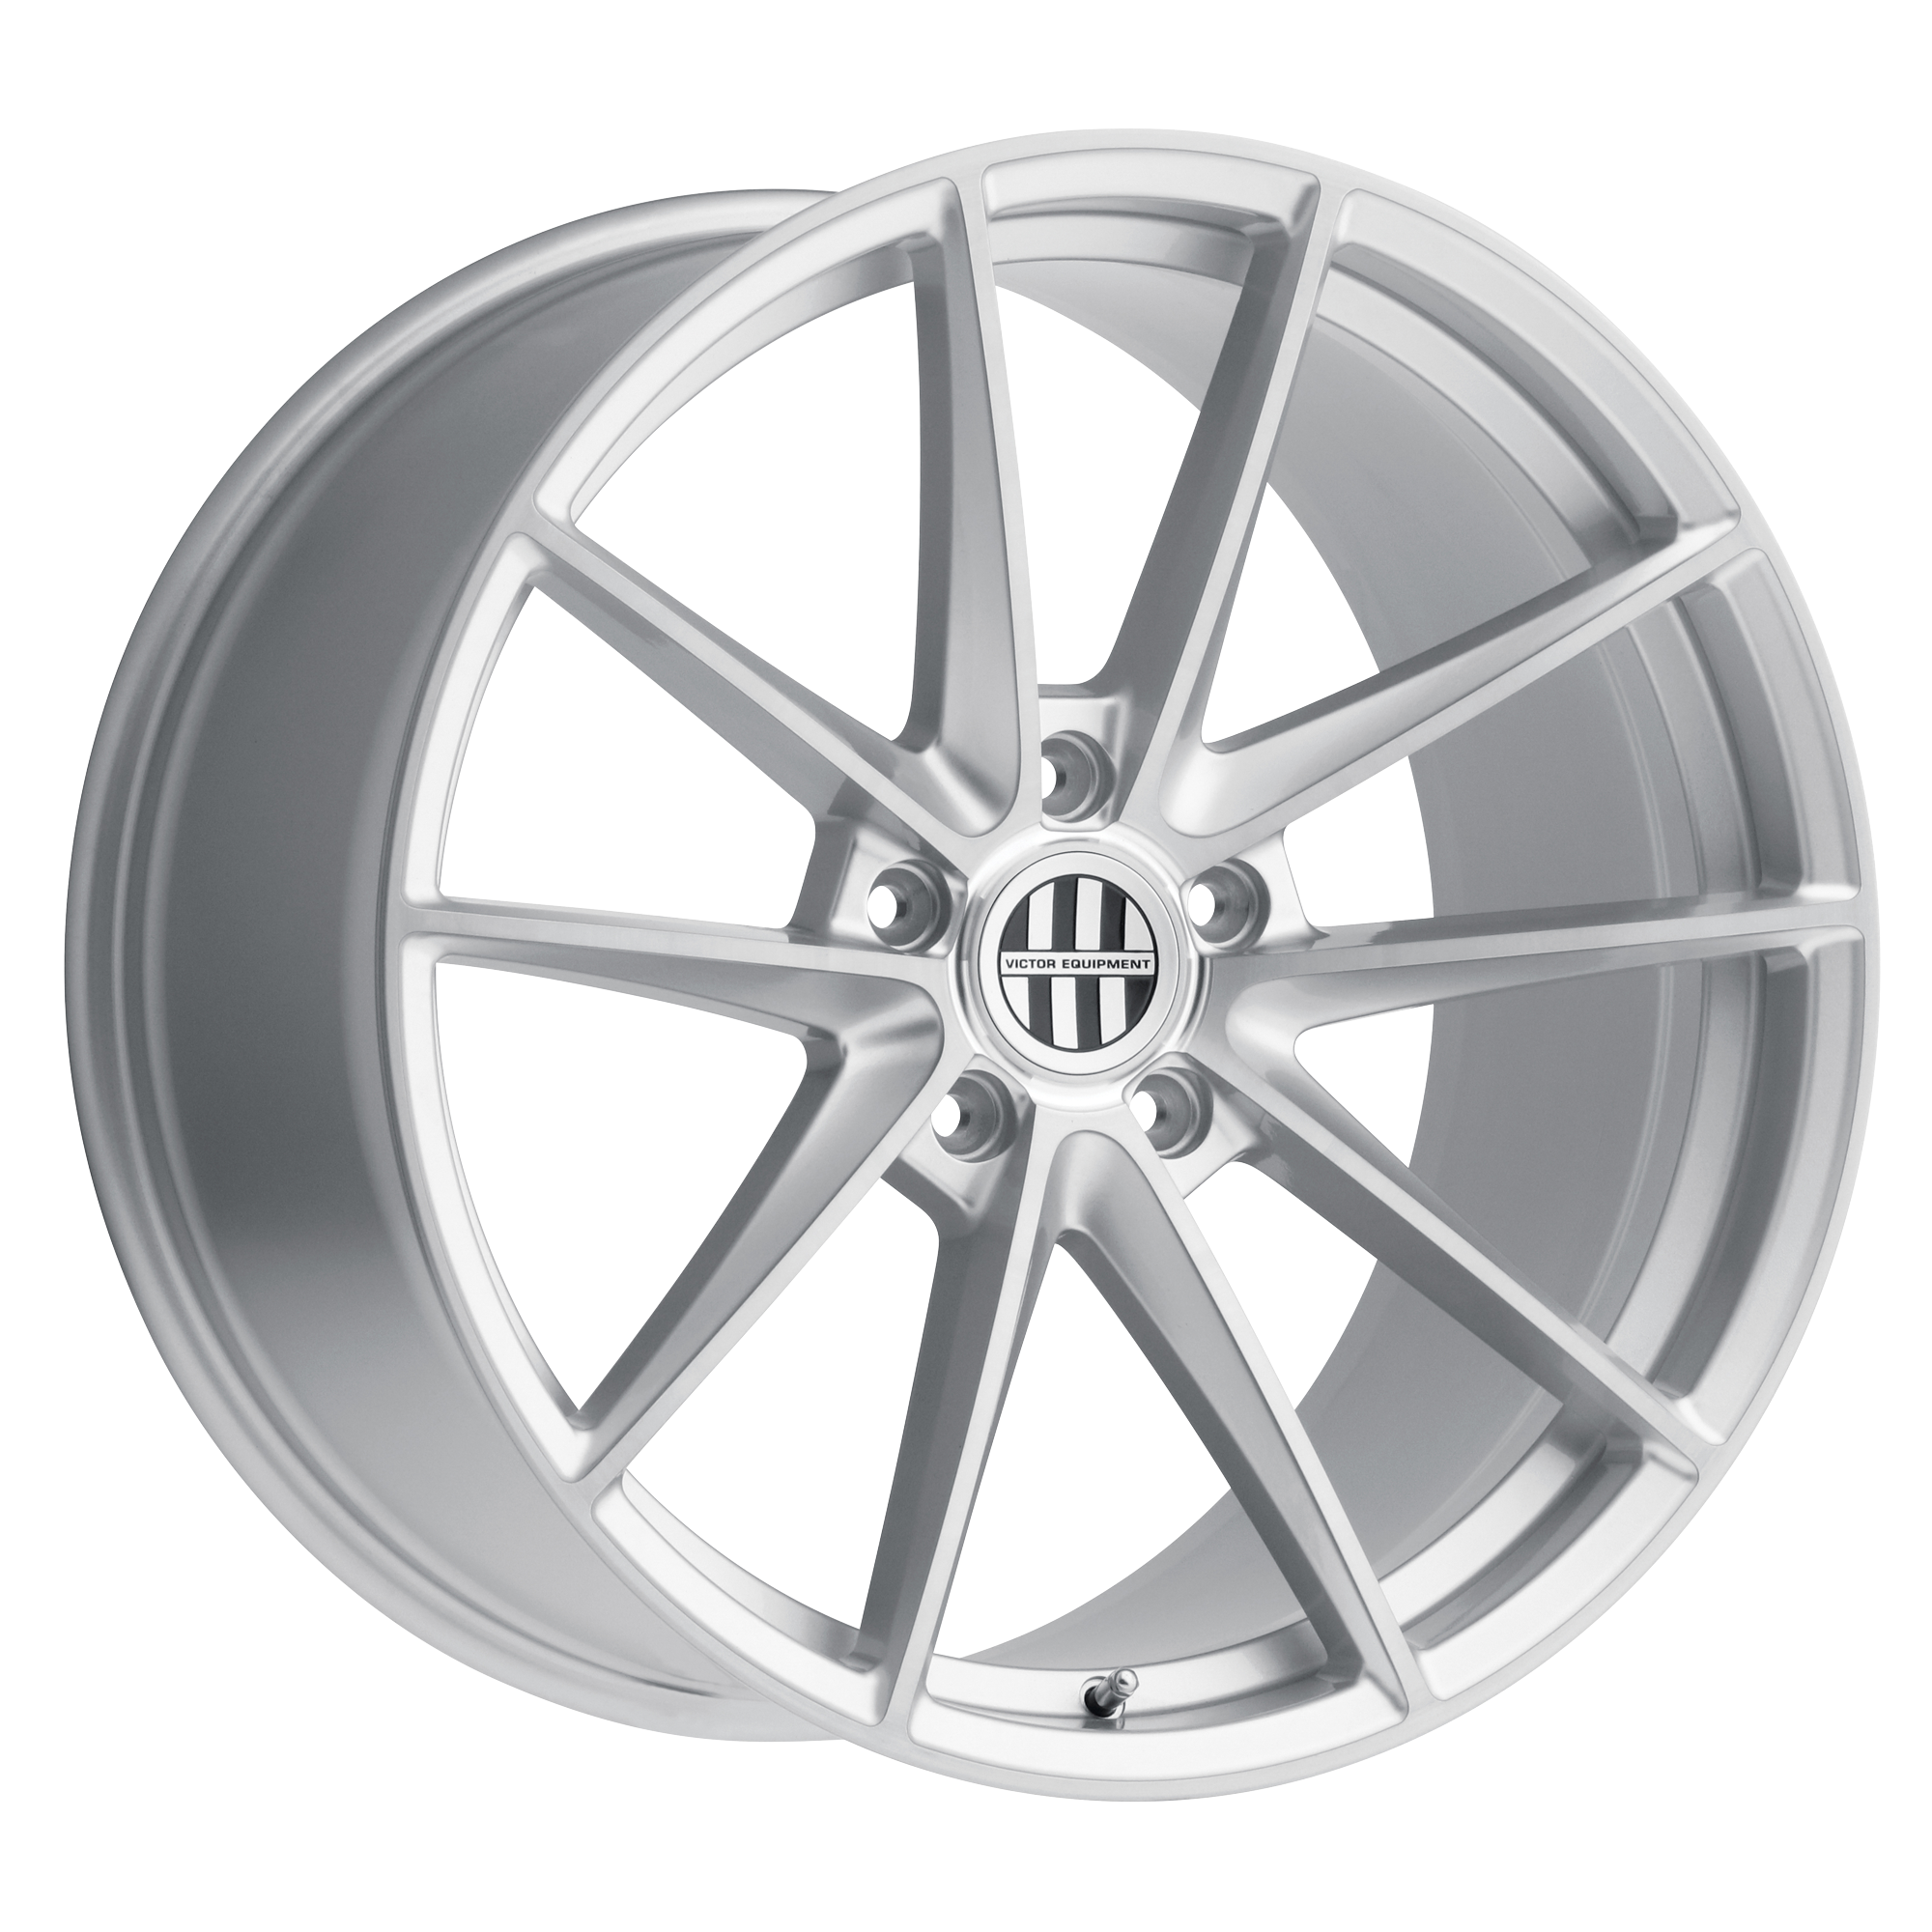 VICTOR EQUIPMENT ZUFFEN SILVER W/ BRUSHED FACE WHEELS | 20X8.5 | 5X130 | OFFSET: 45MM | CB: 71.5MM